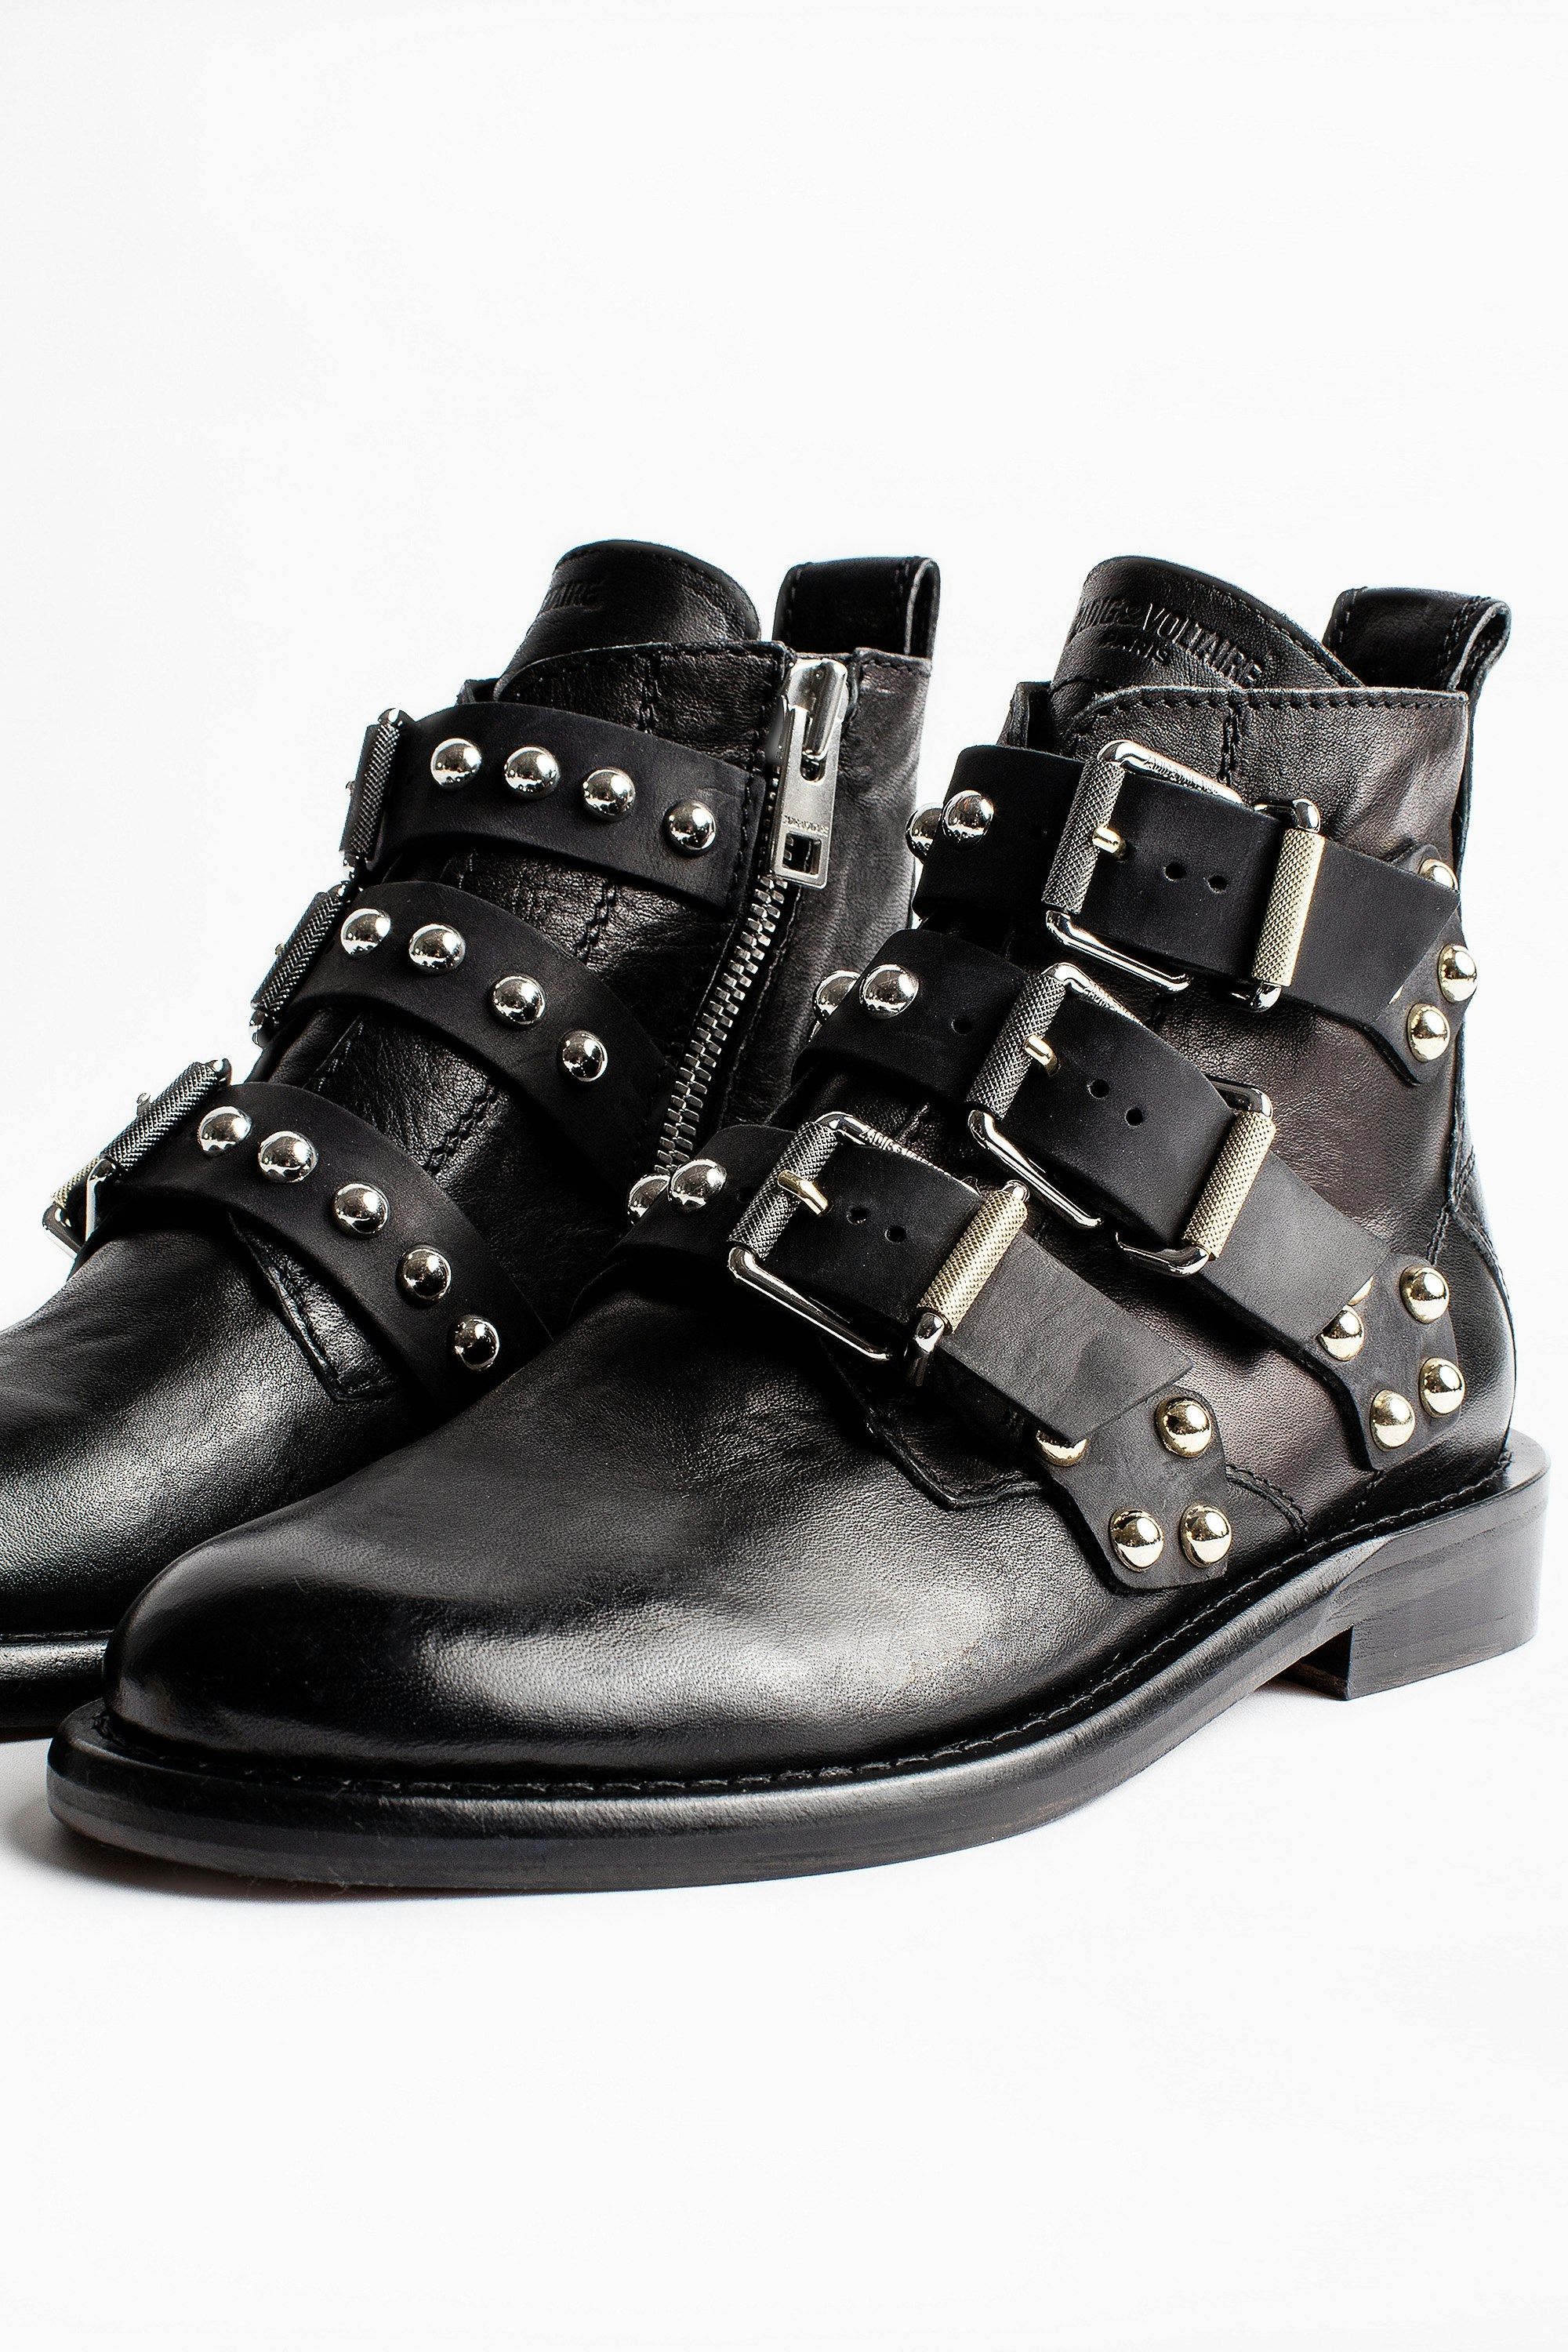 black ankle boots with buckles and studs